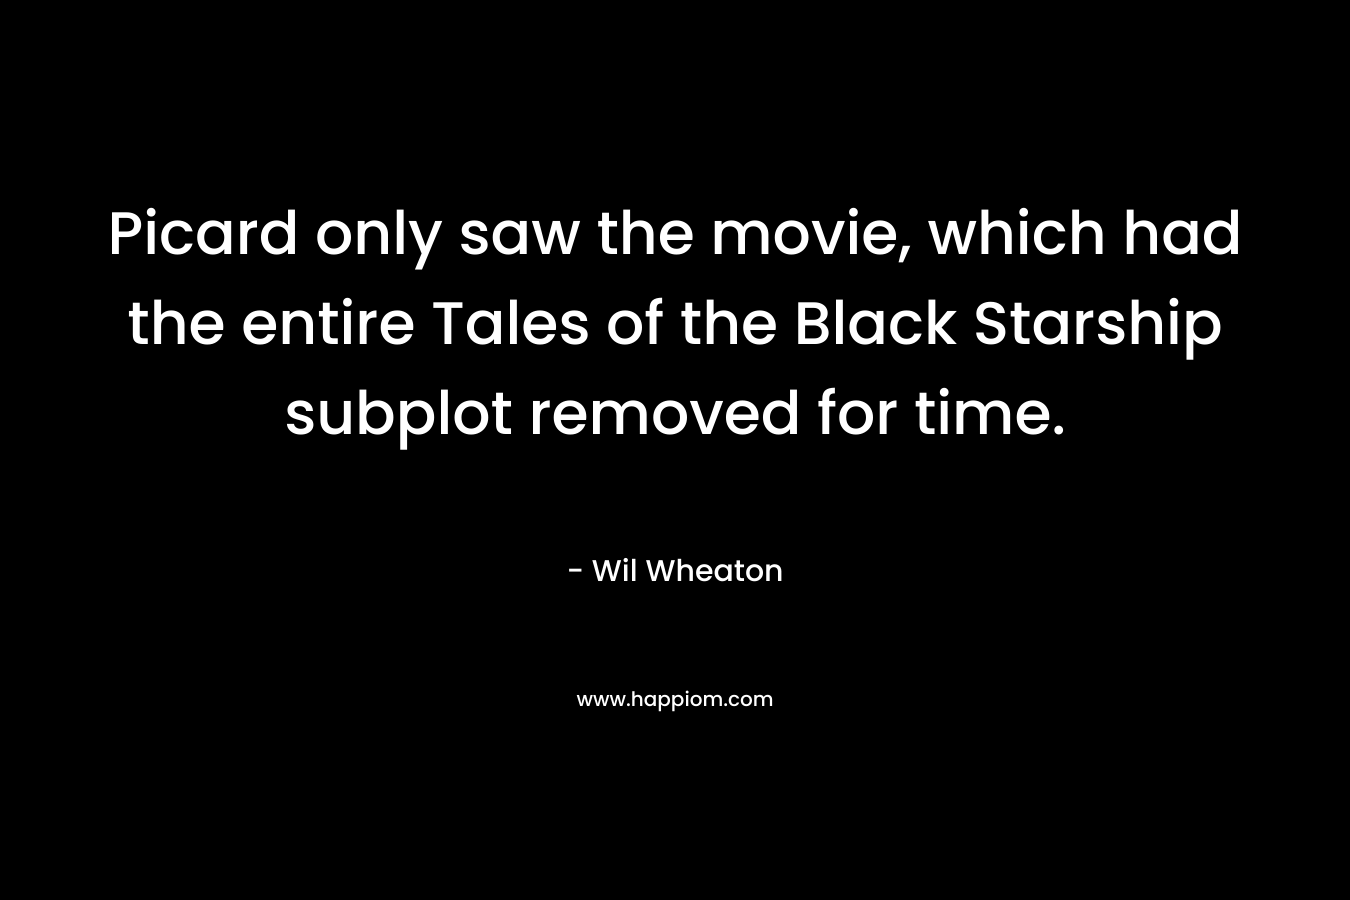 Picard only saw the movie, which had the entire Tales of the Black Starship subplot removed for time.